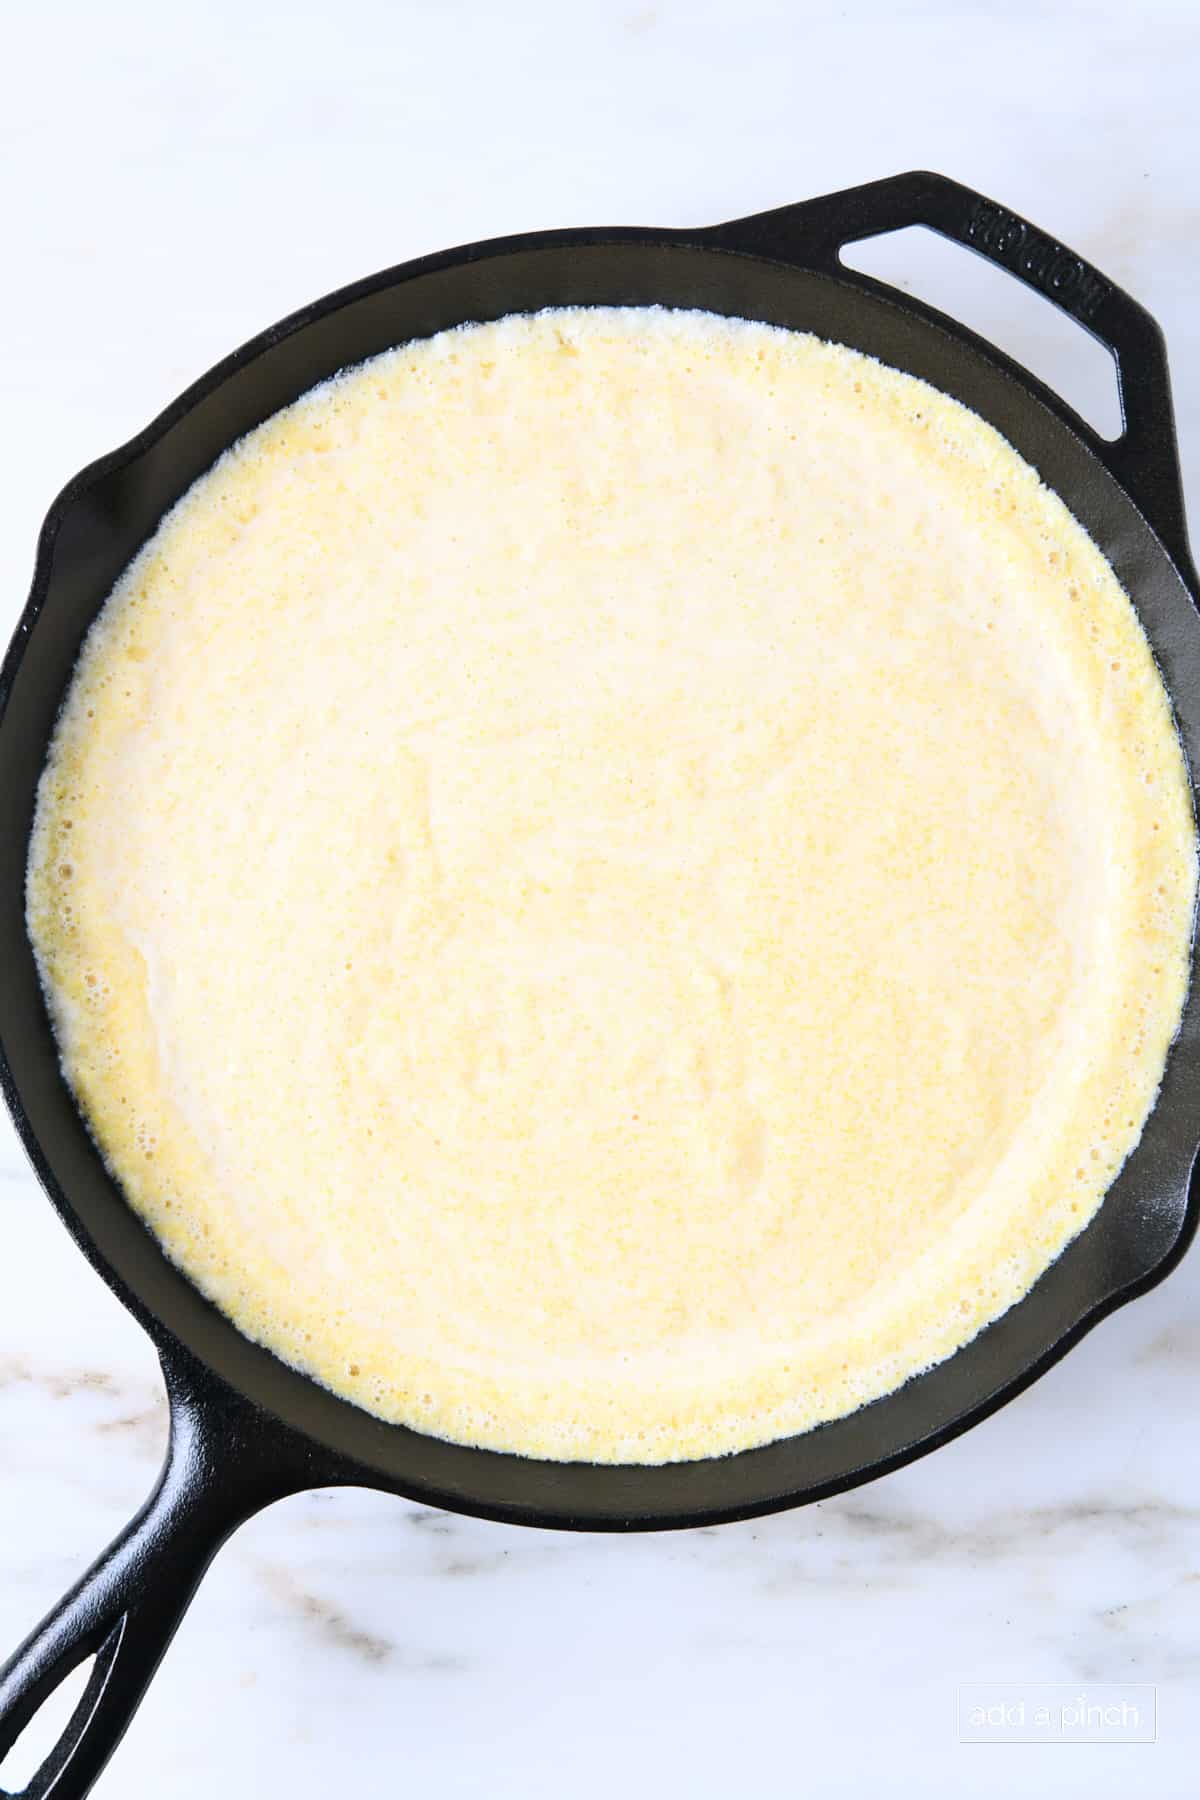 Cornbread batter in a cast iron skillet ready to be baked.